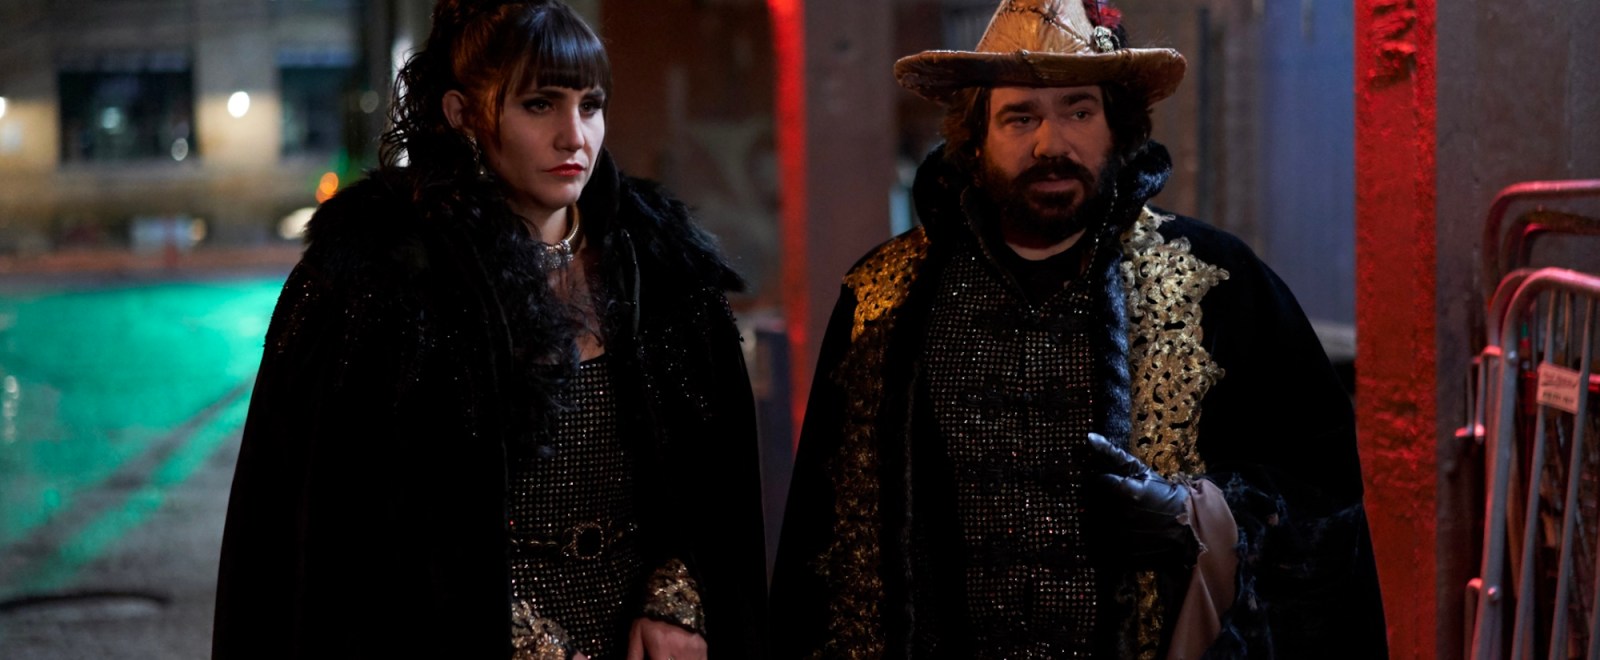 Natasia Demetriou and Matt Berry in What We Do in the Shadows